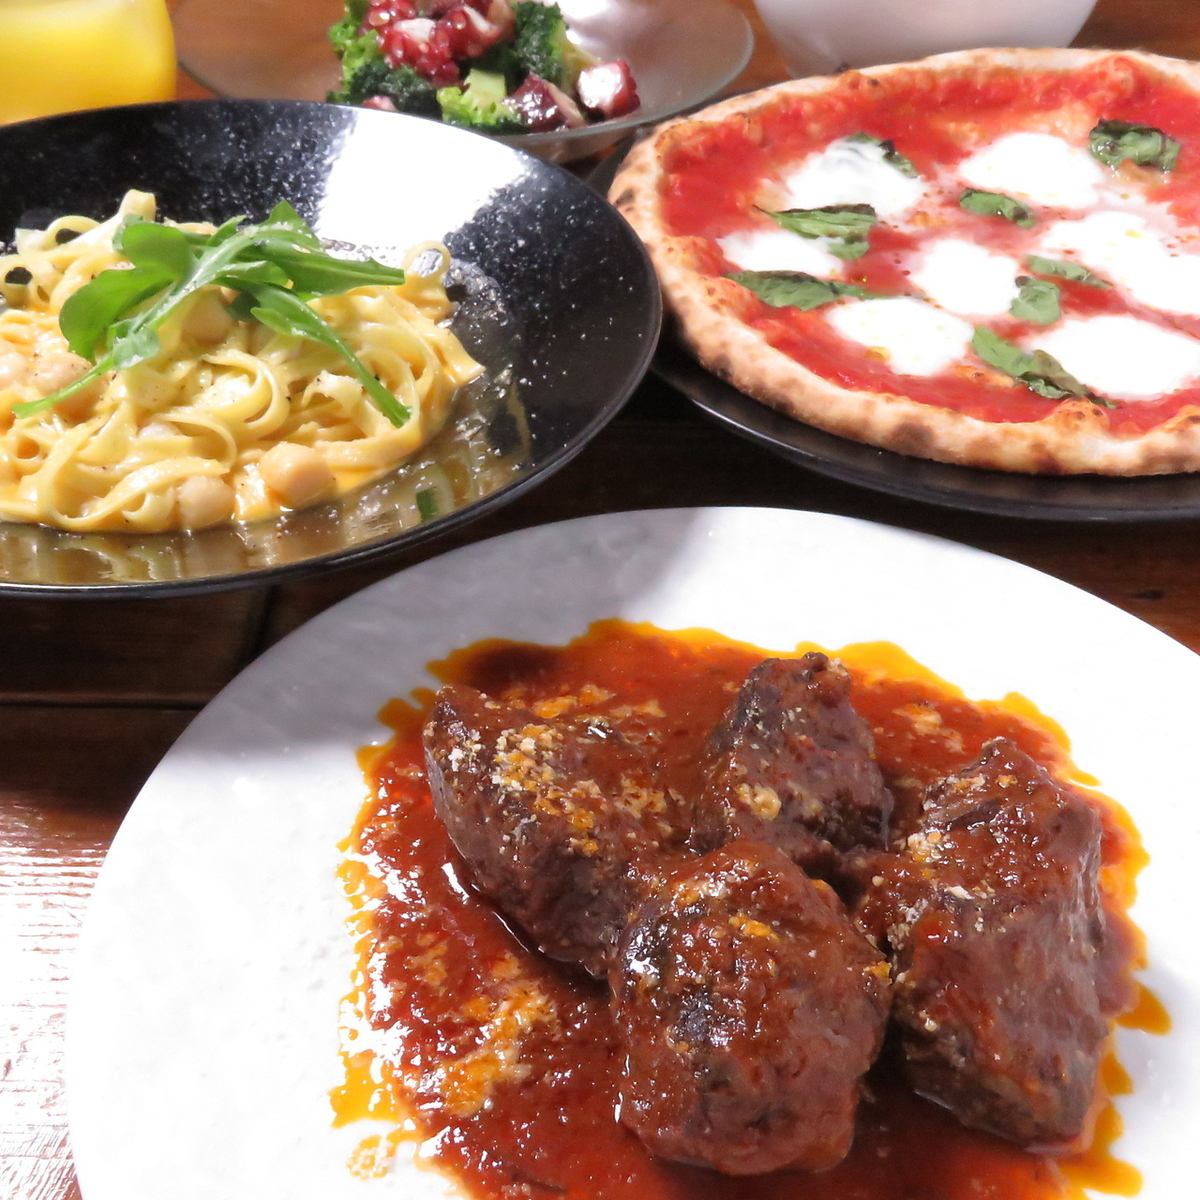 There is no doubt that your girls' night out will be exciting with authentic Italian food!